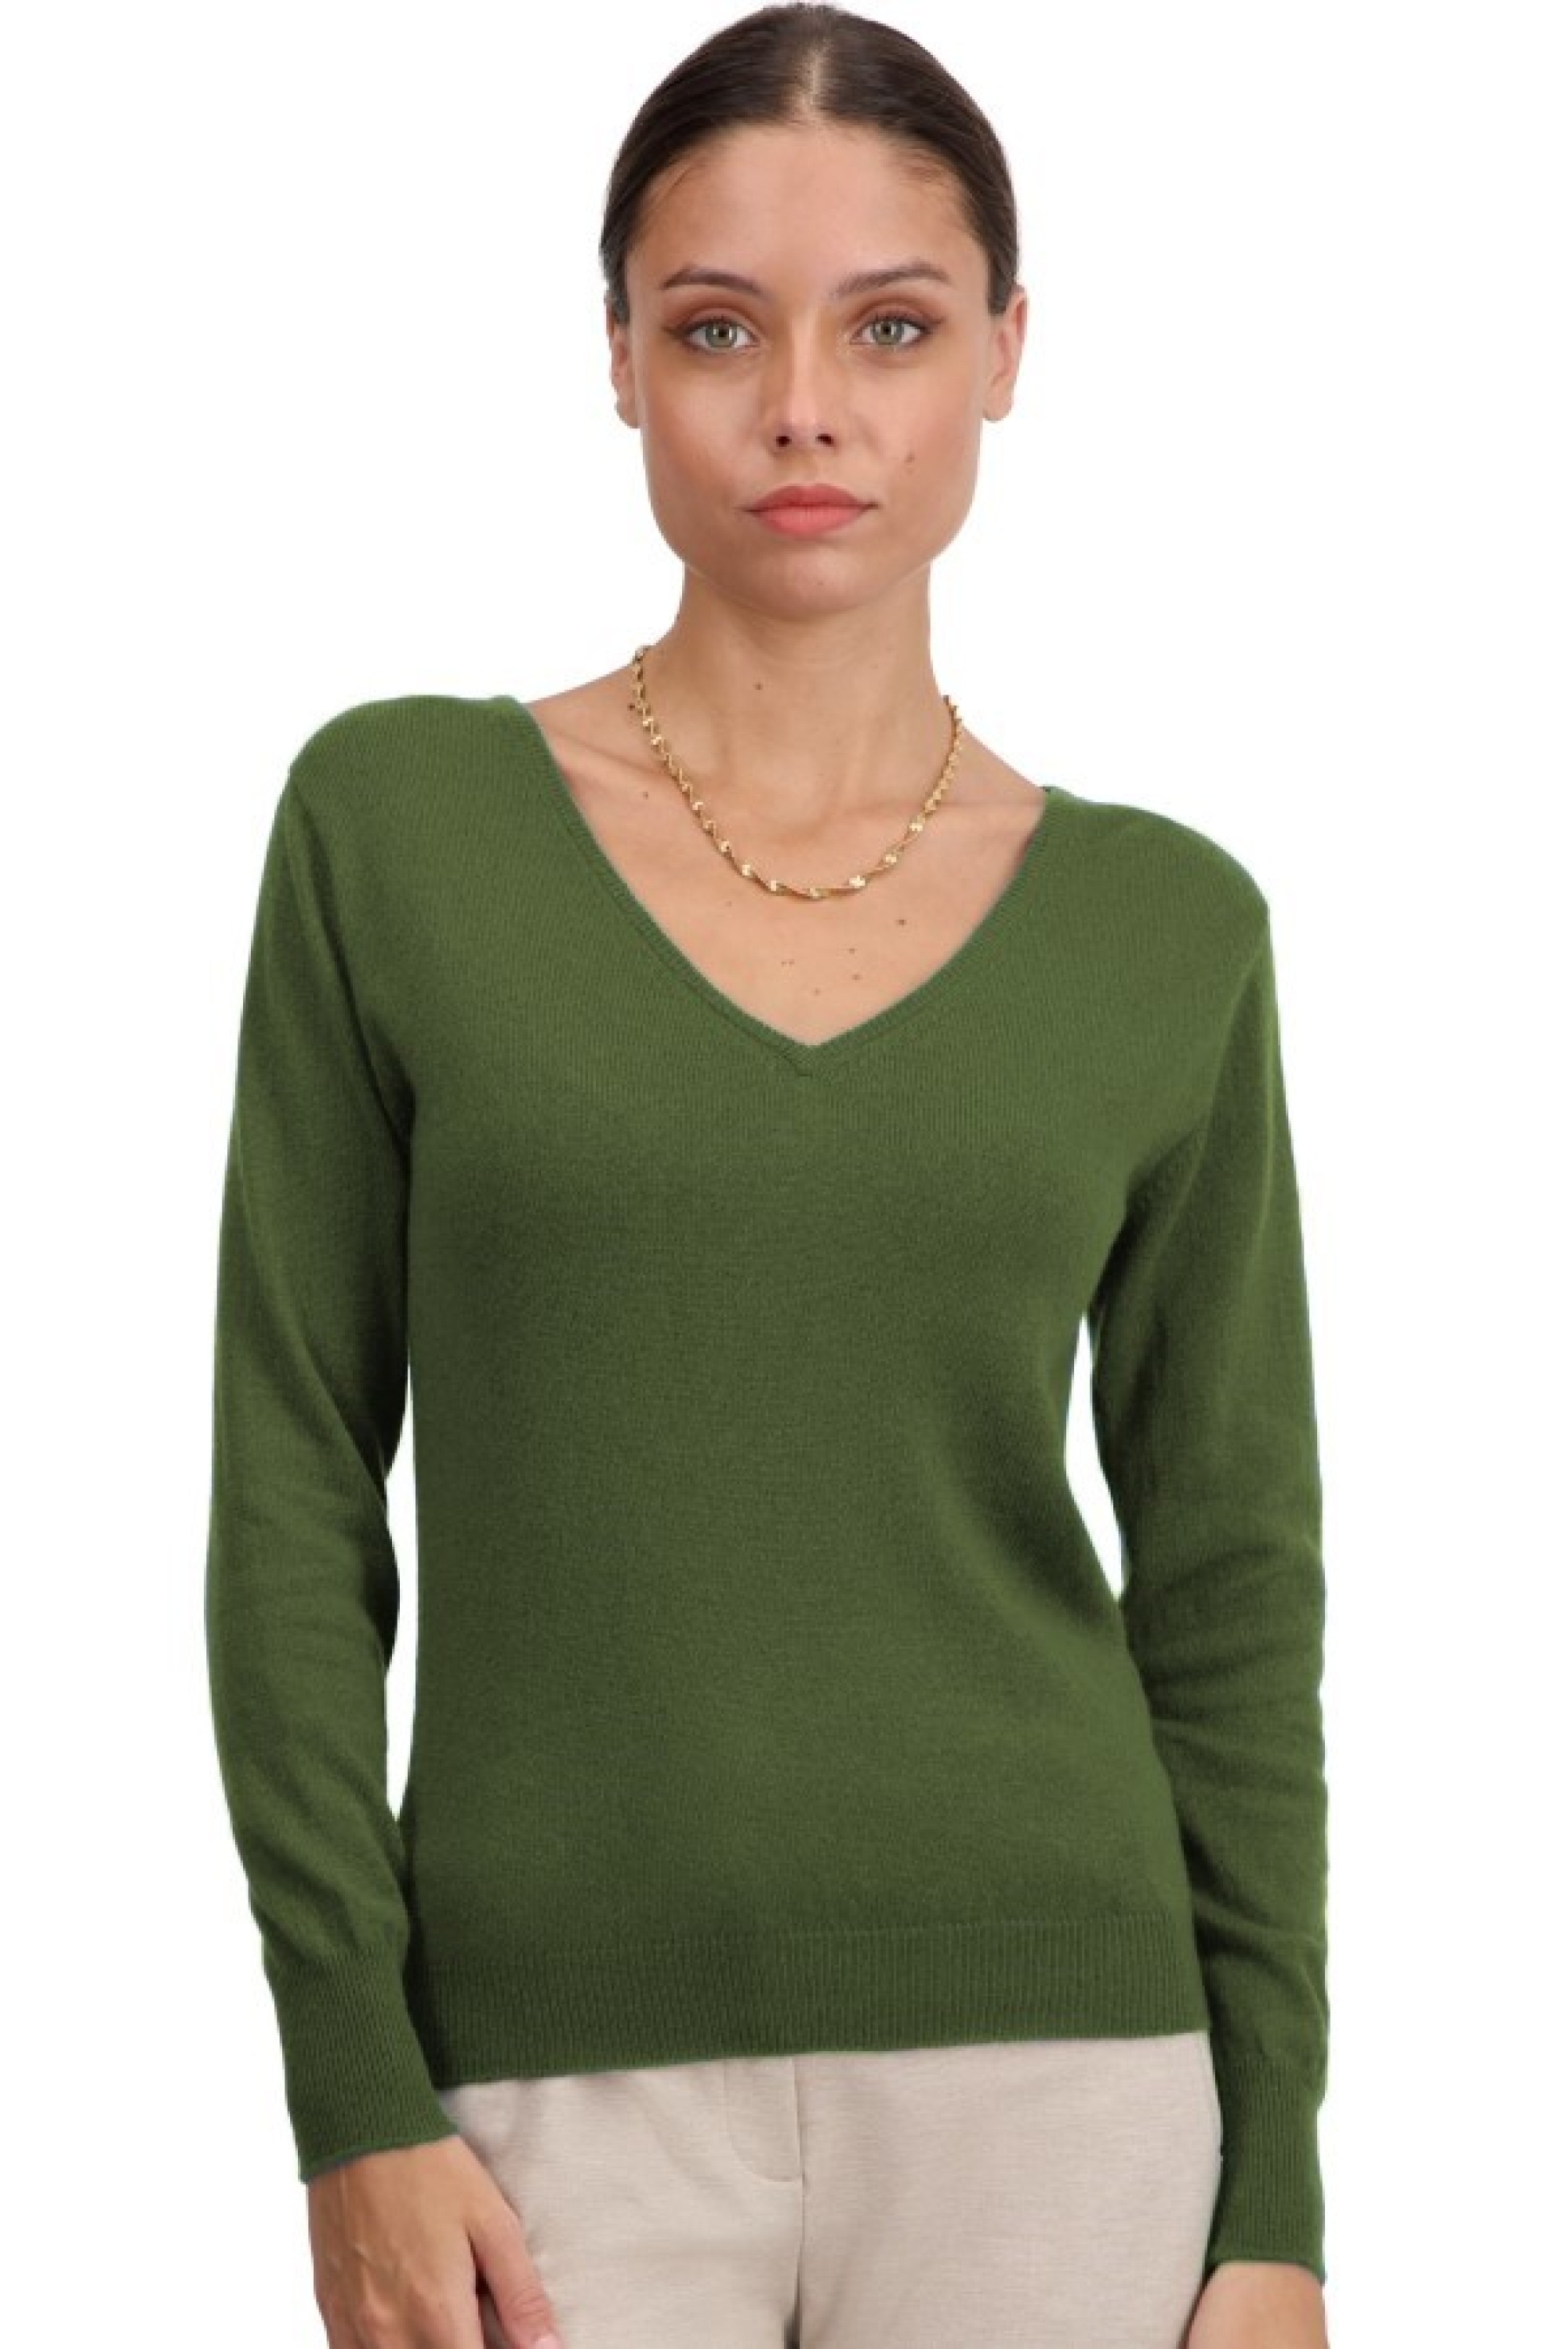 Cashmere ladies basic sweaters at low prices trieste first olive 2xl